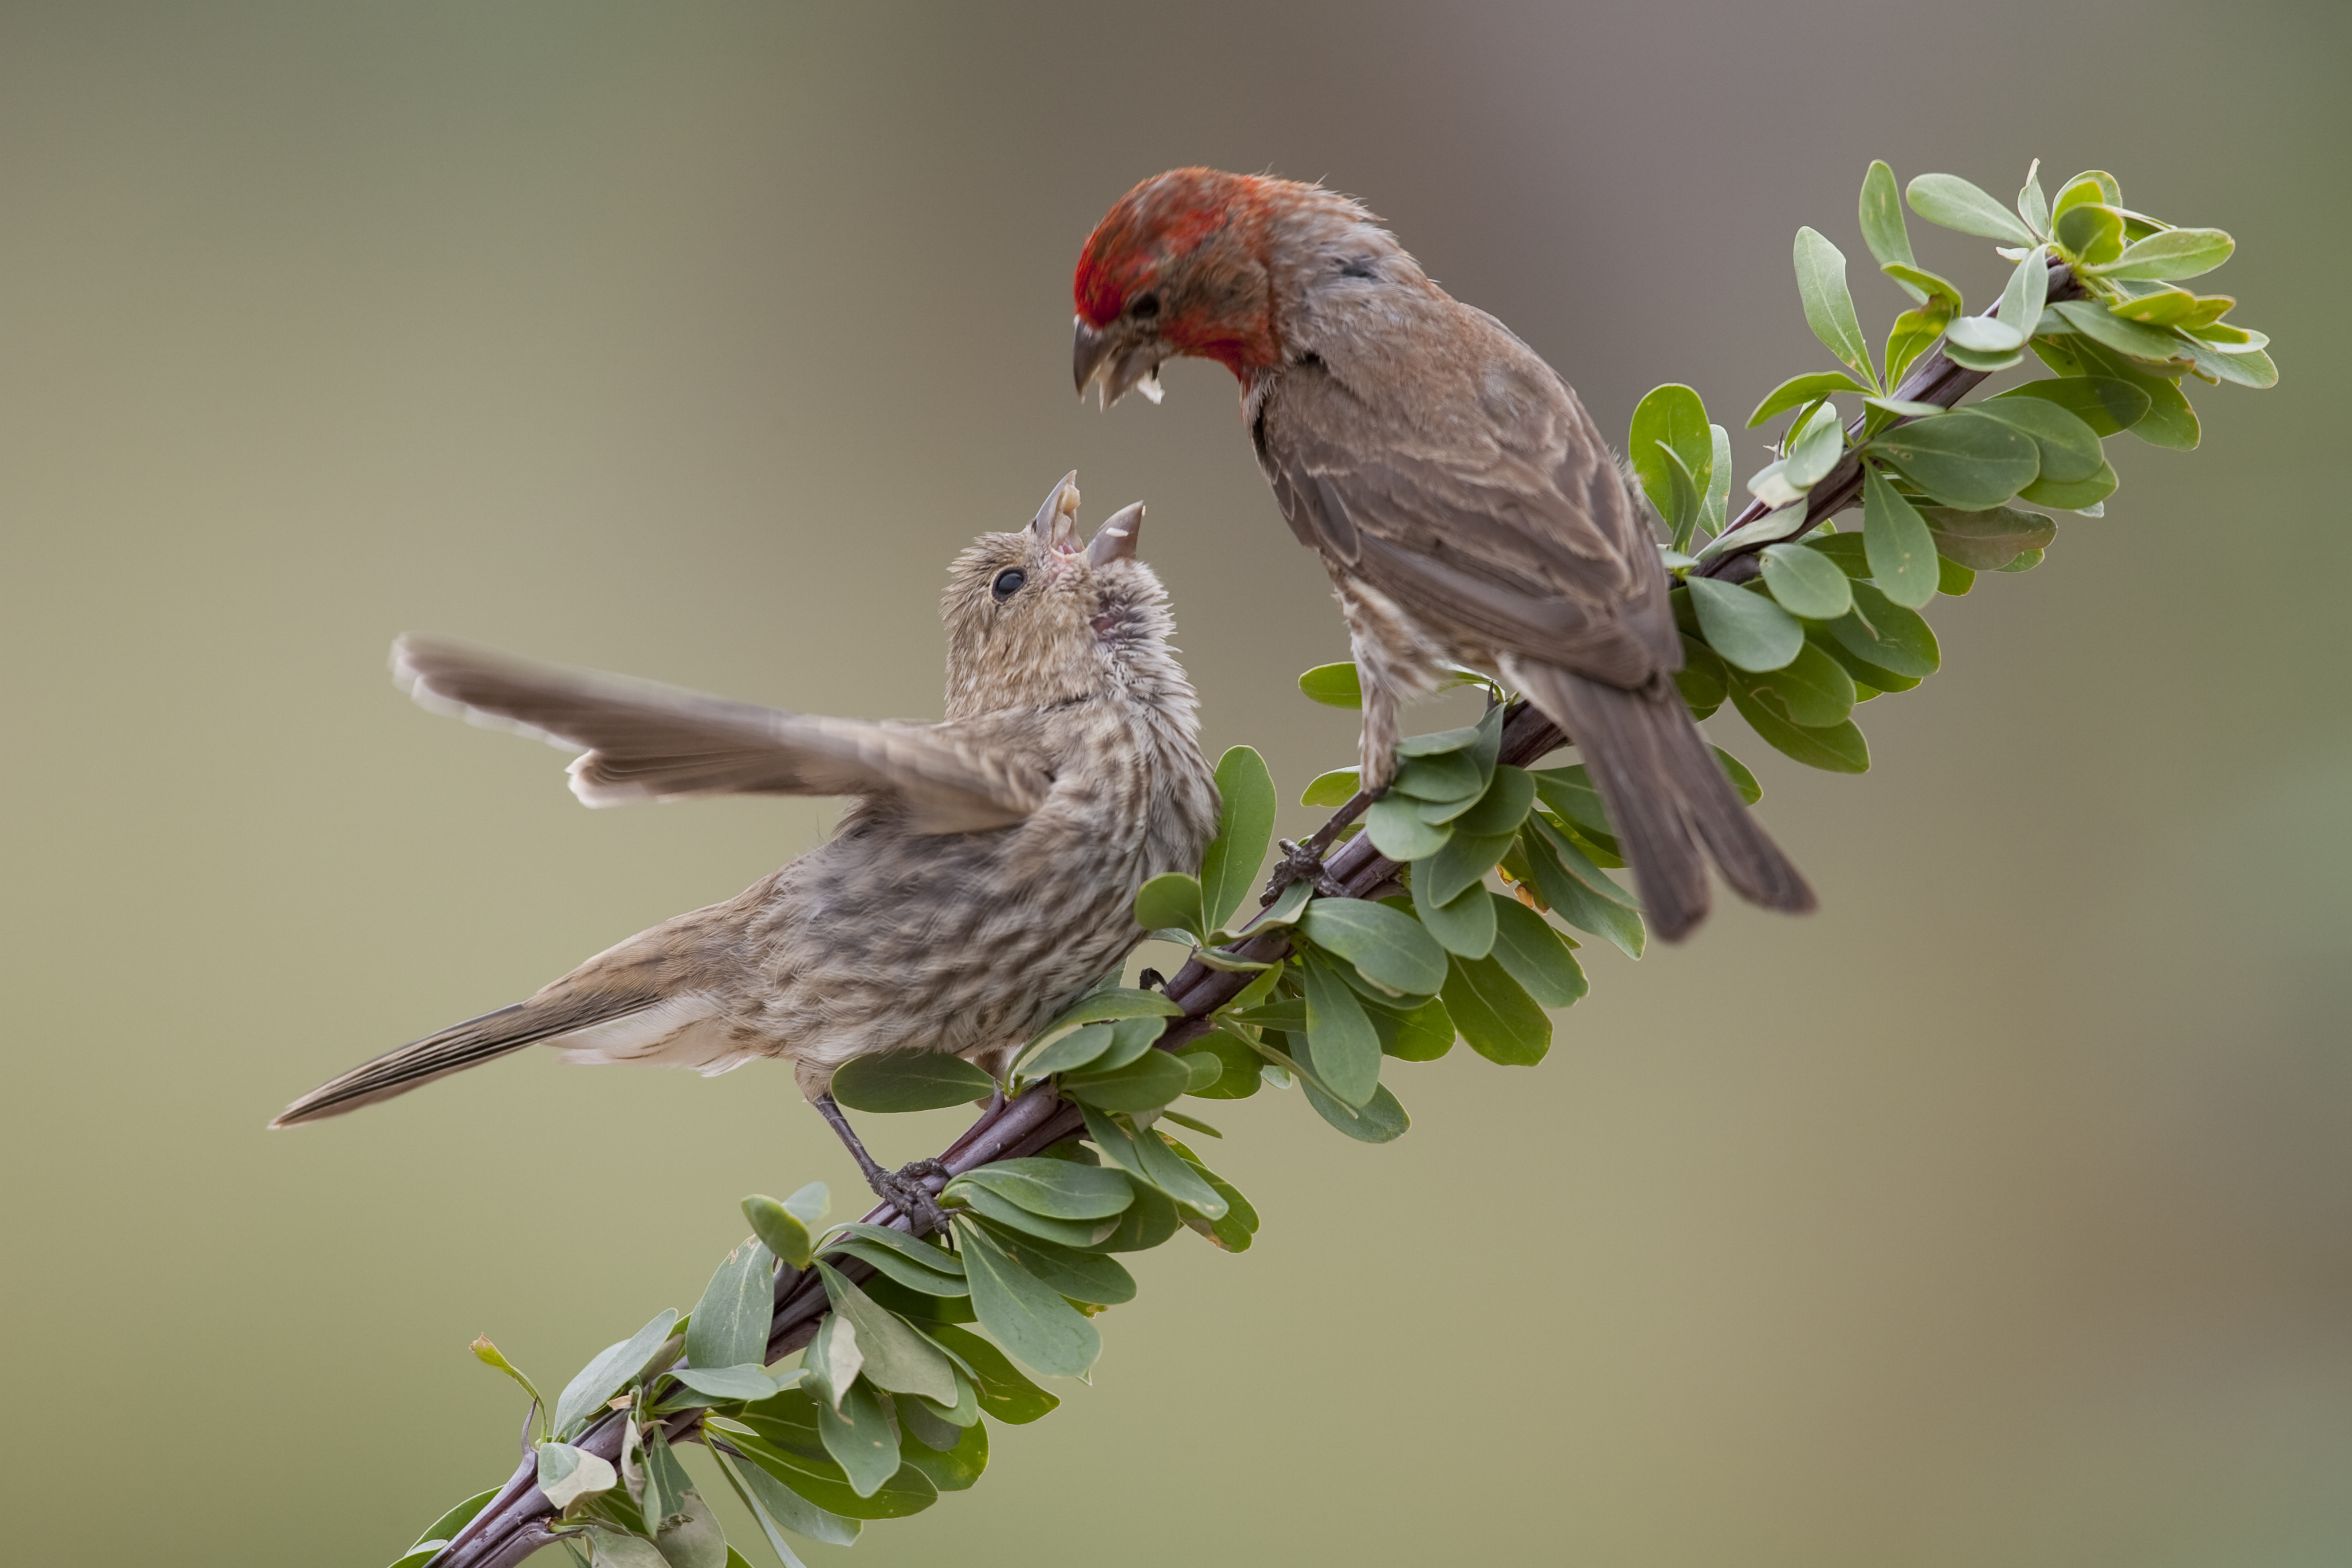 House Finches And House Sparrows Celebrate Urban Birds,What Temperature To Bake Chicken In The Oven